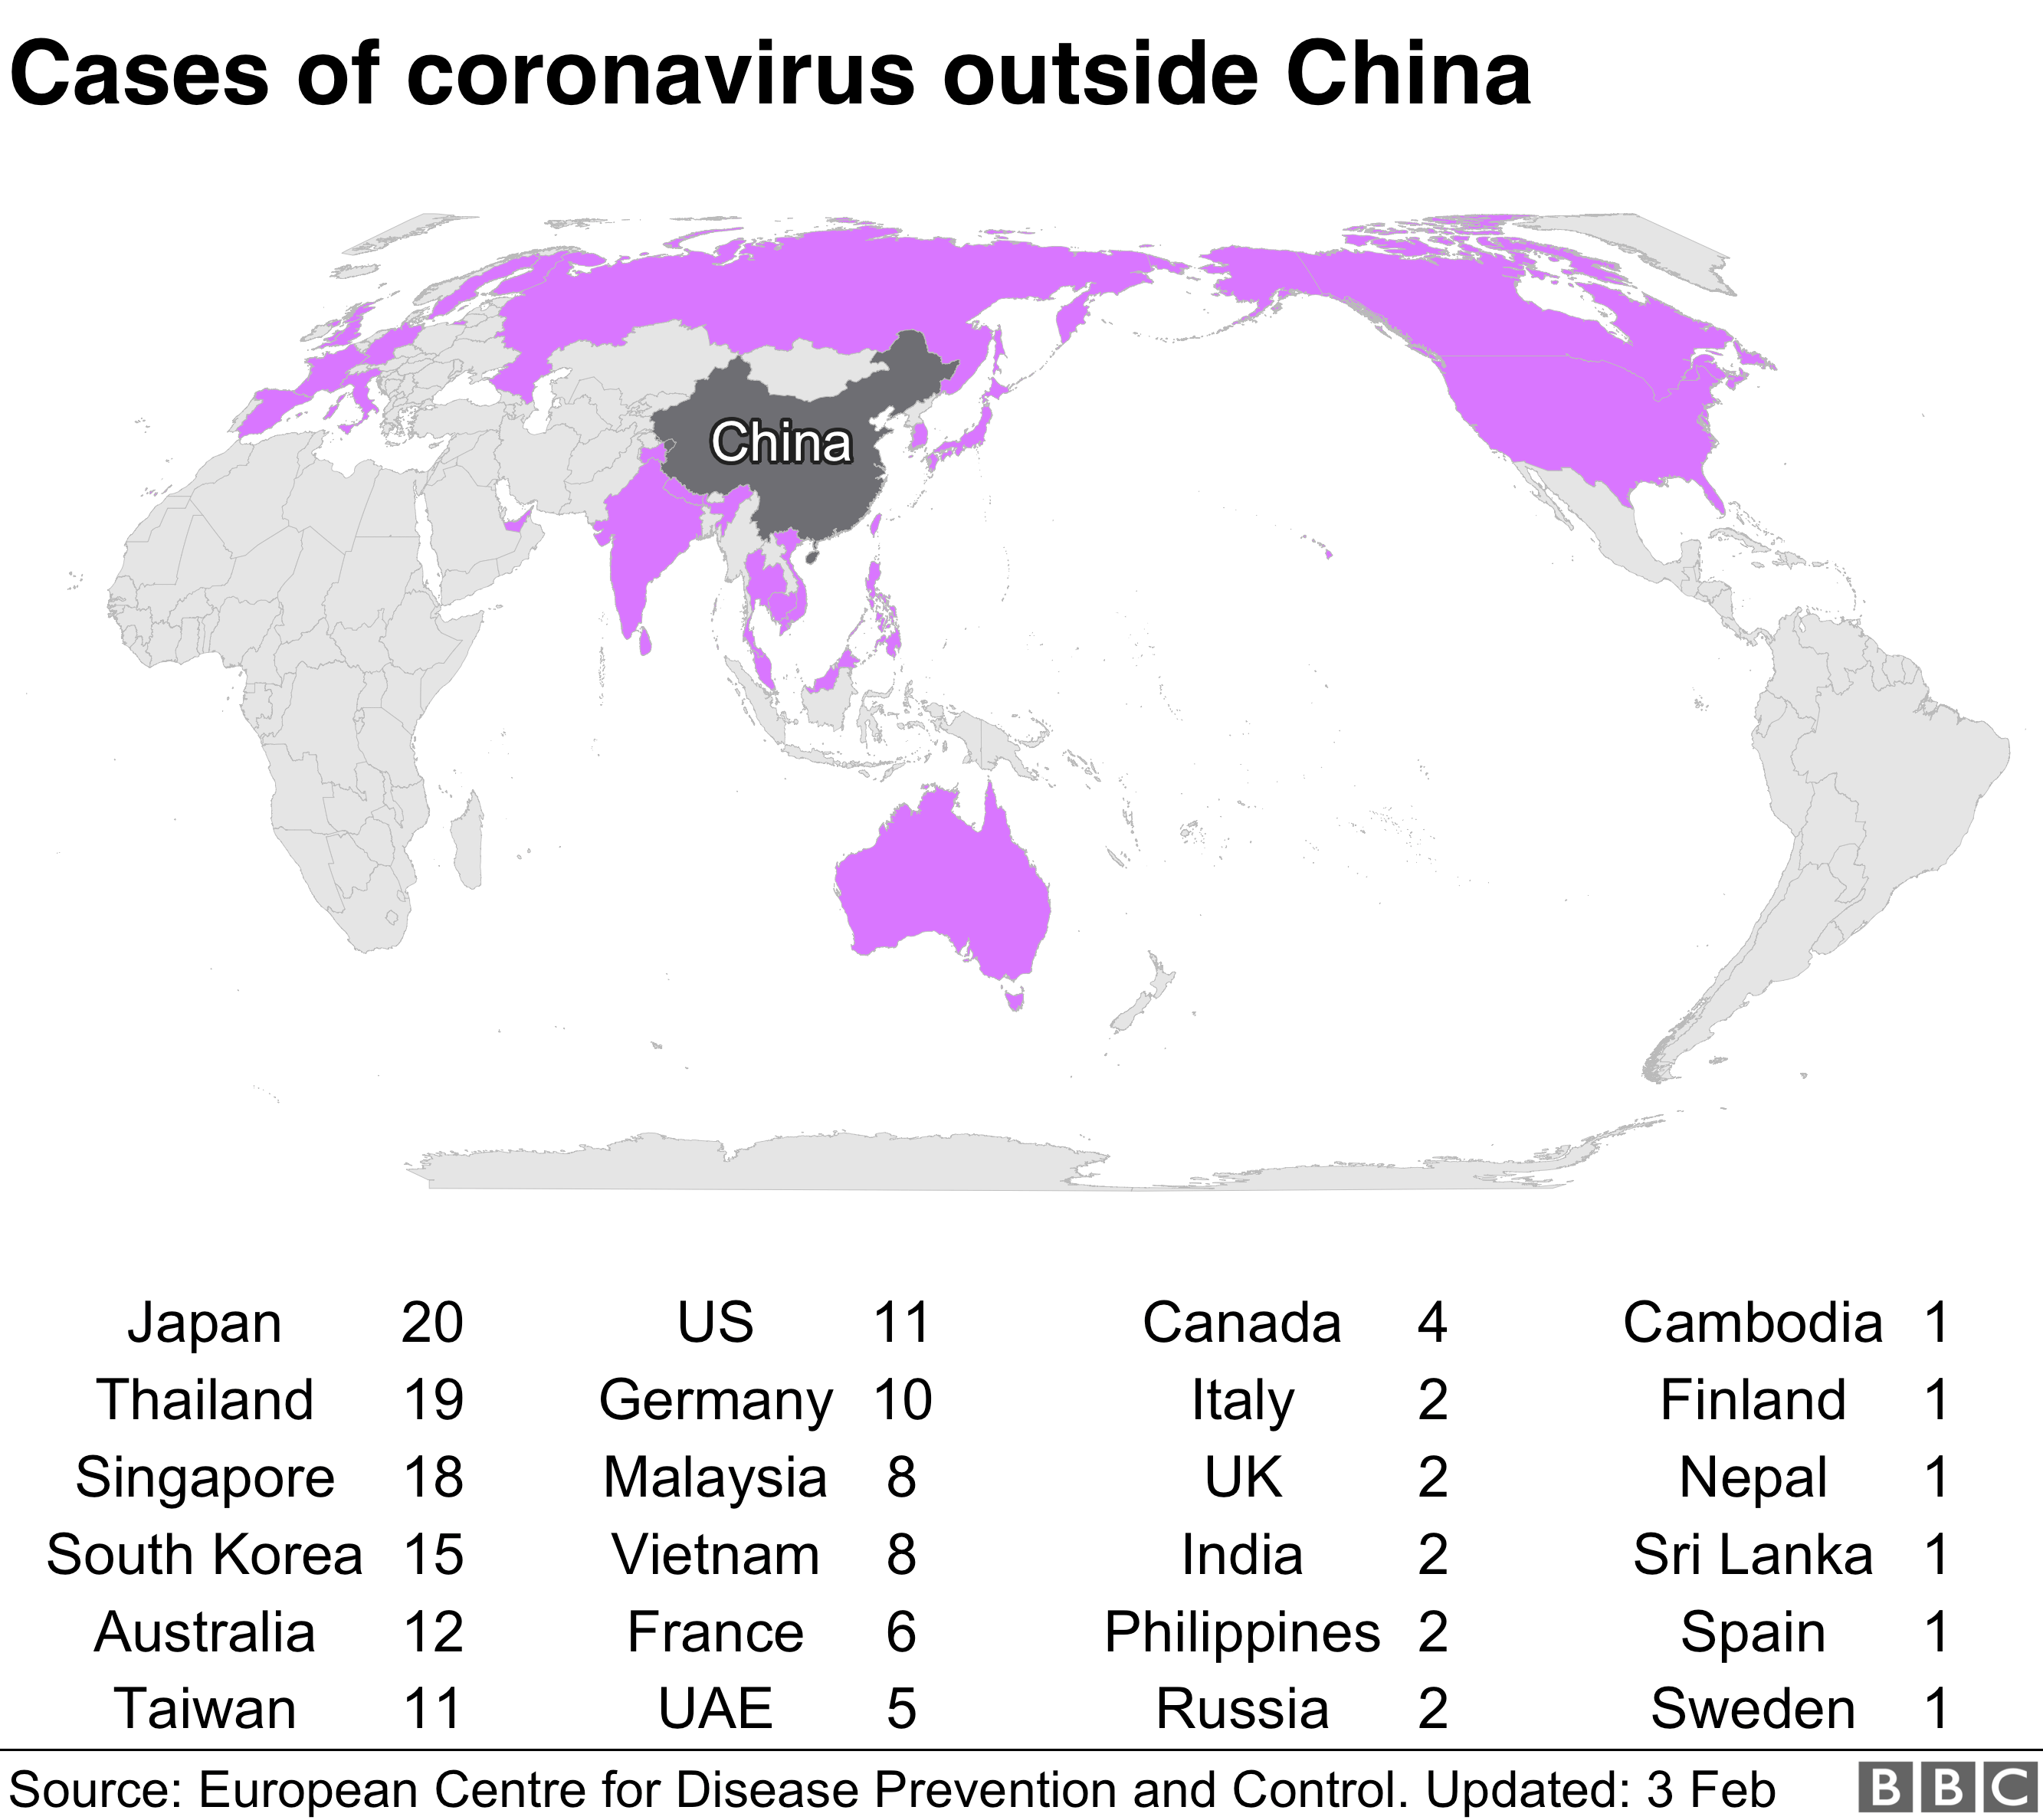 Coronavirus cases have spread to 25 countries across the world. Japan has 20 cases, Thailand 19, Singapore 18 and South Korea 15.